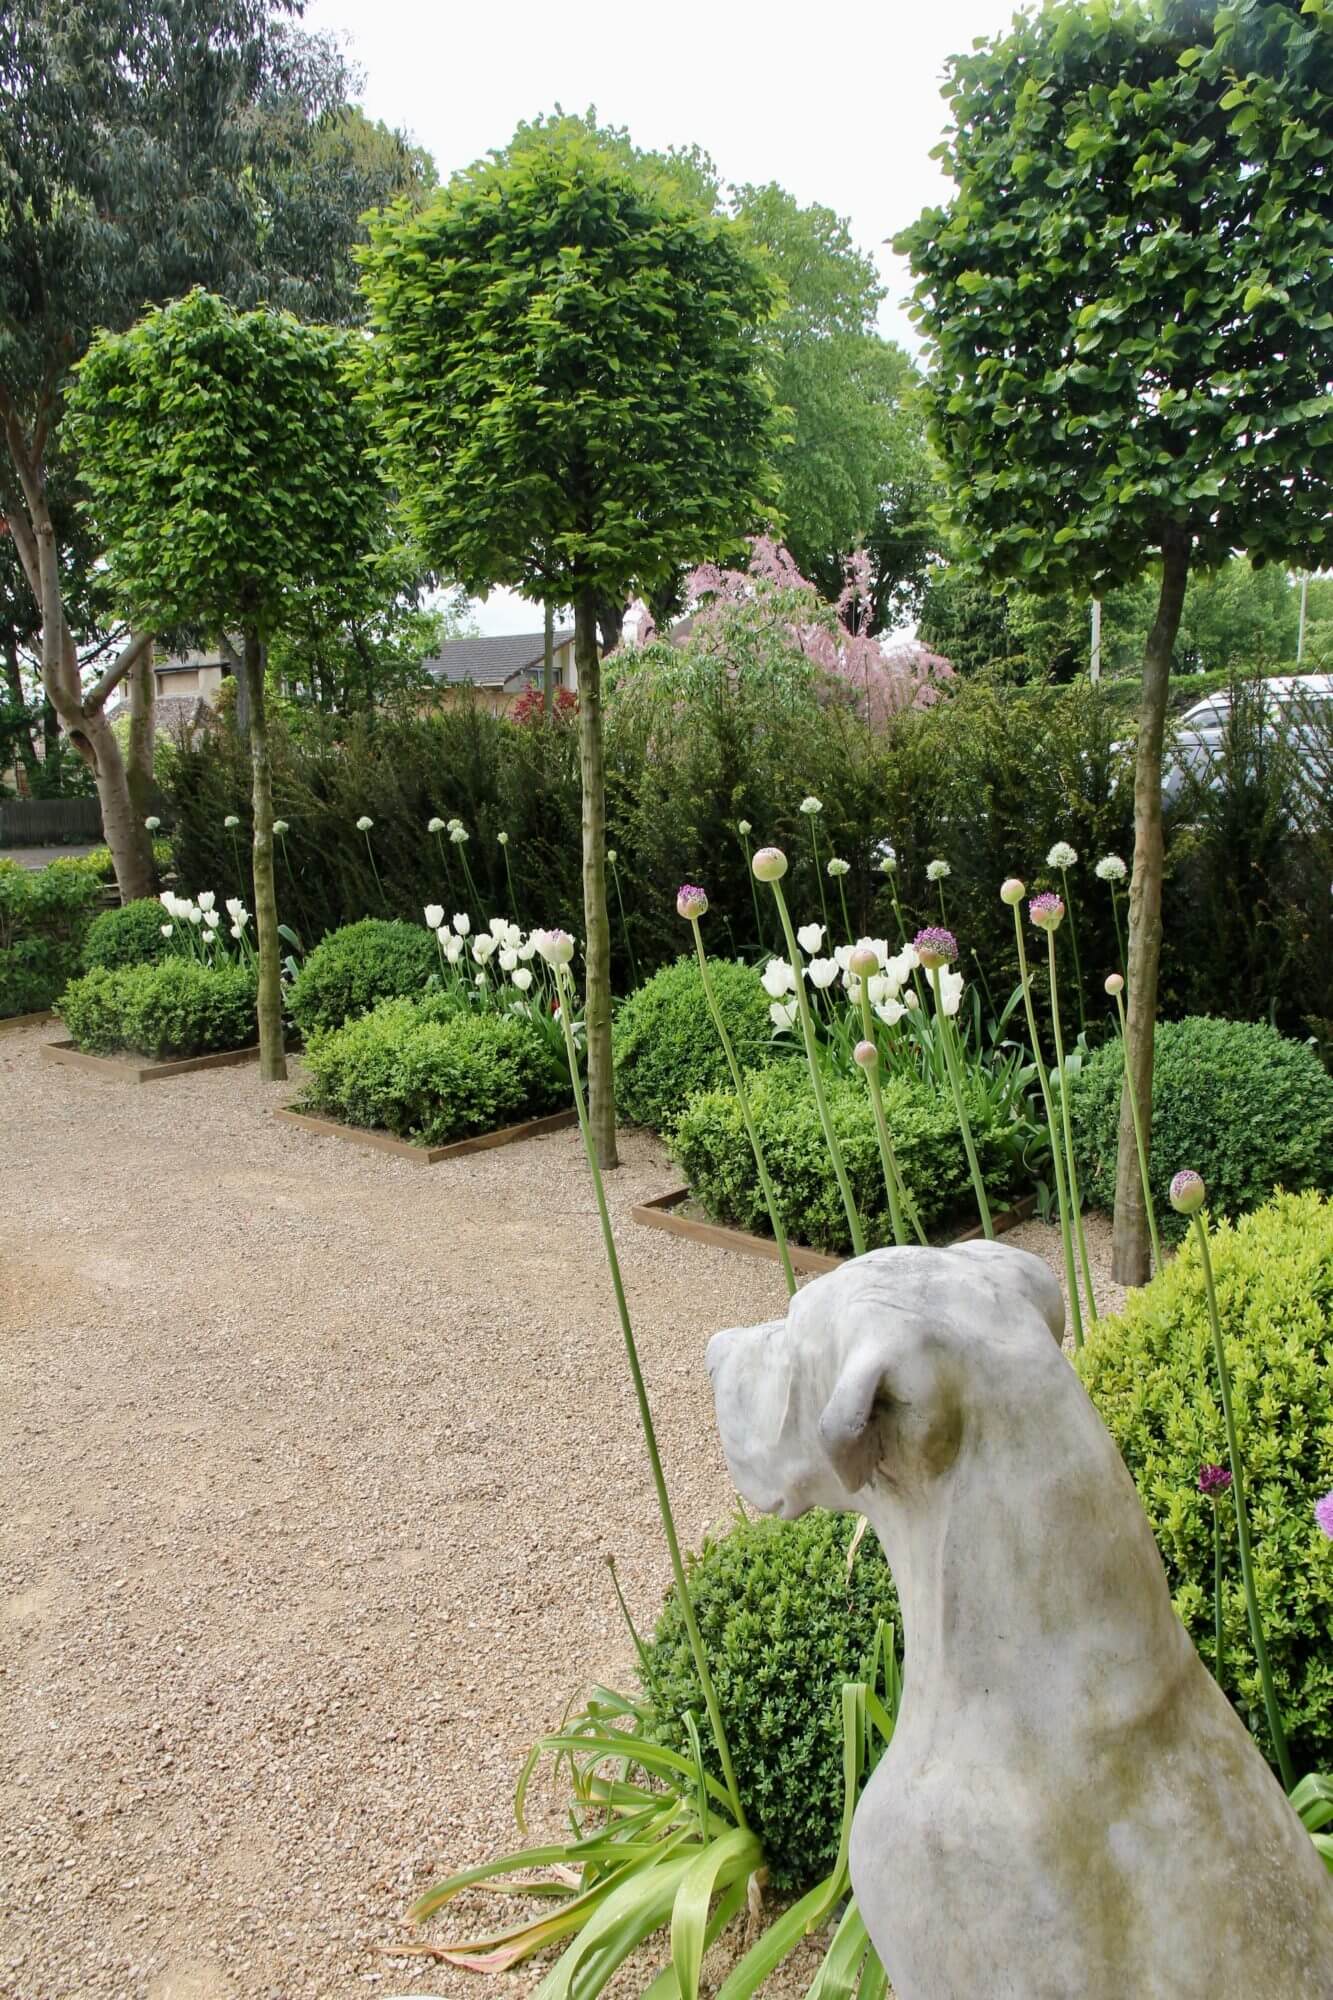 Rows of pleached box trees and topiary